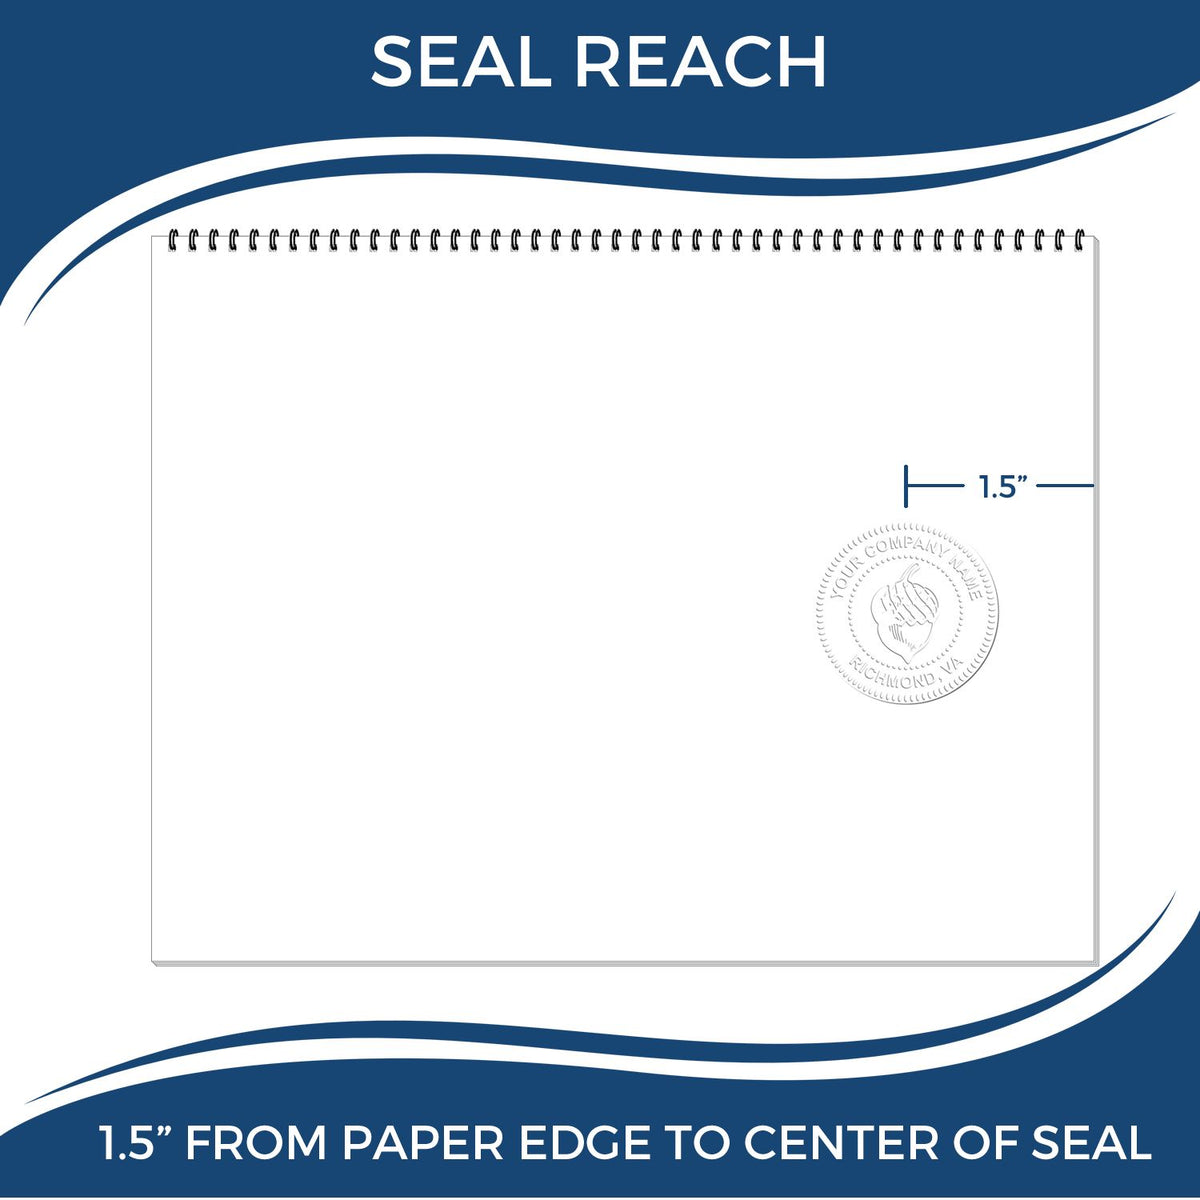 An infographic showing the seal reach which is represented by a ruler and a miniature seal image of the Massachusetts Geologist Desk Seal